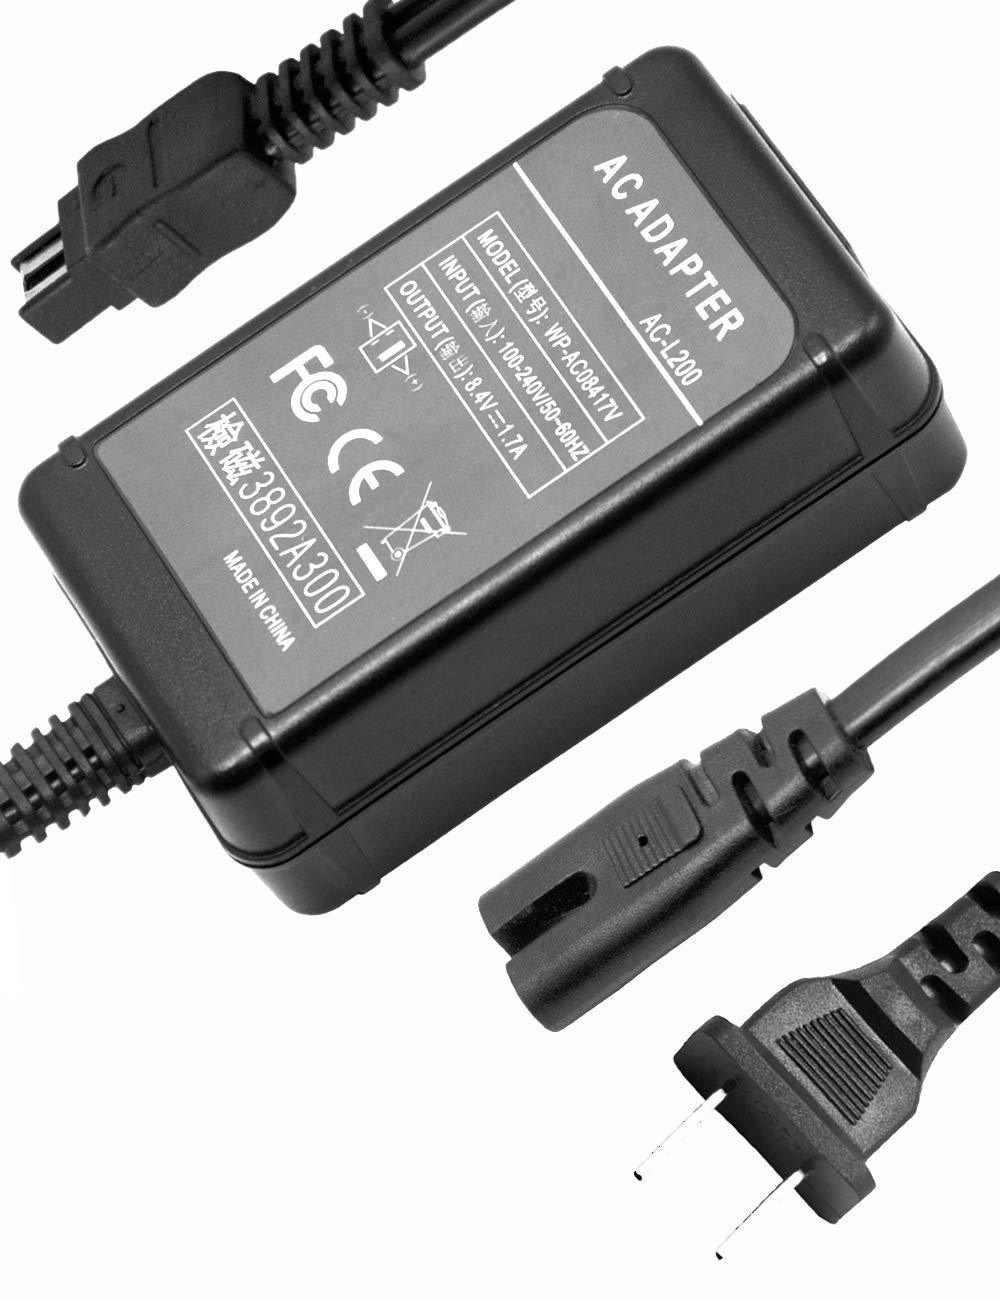 Wmythk AC-L200 AC Power Adapter Charger Kit for Sony Handycam, AC Power Supply Adapter Replacement for Original Sony AC-L200C AC-L25A AC-L25B AC-L25C Adapter